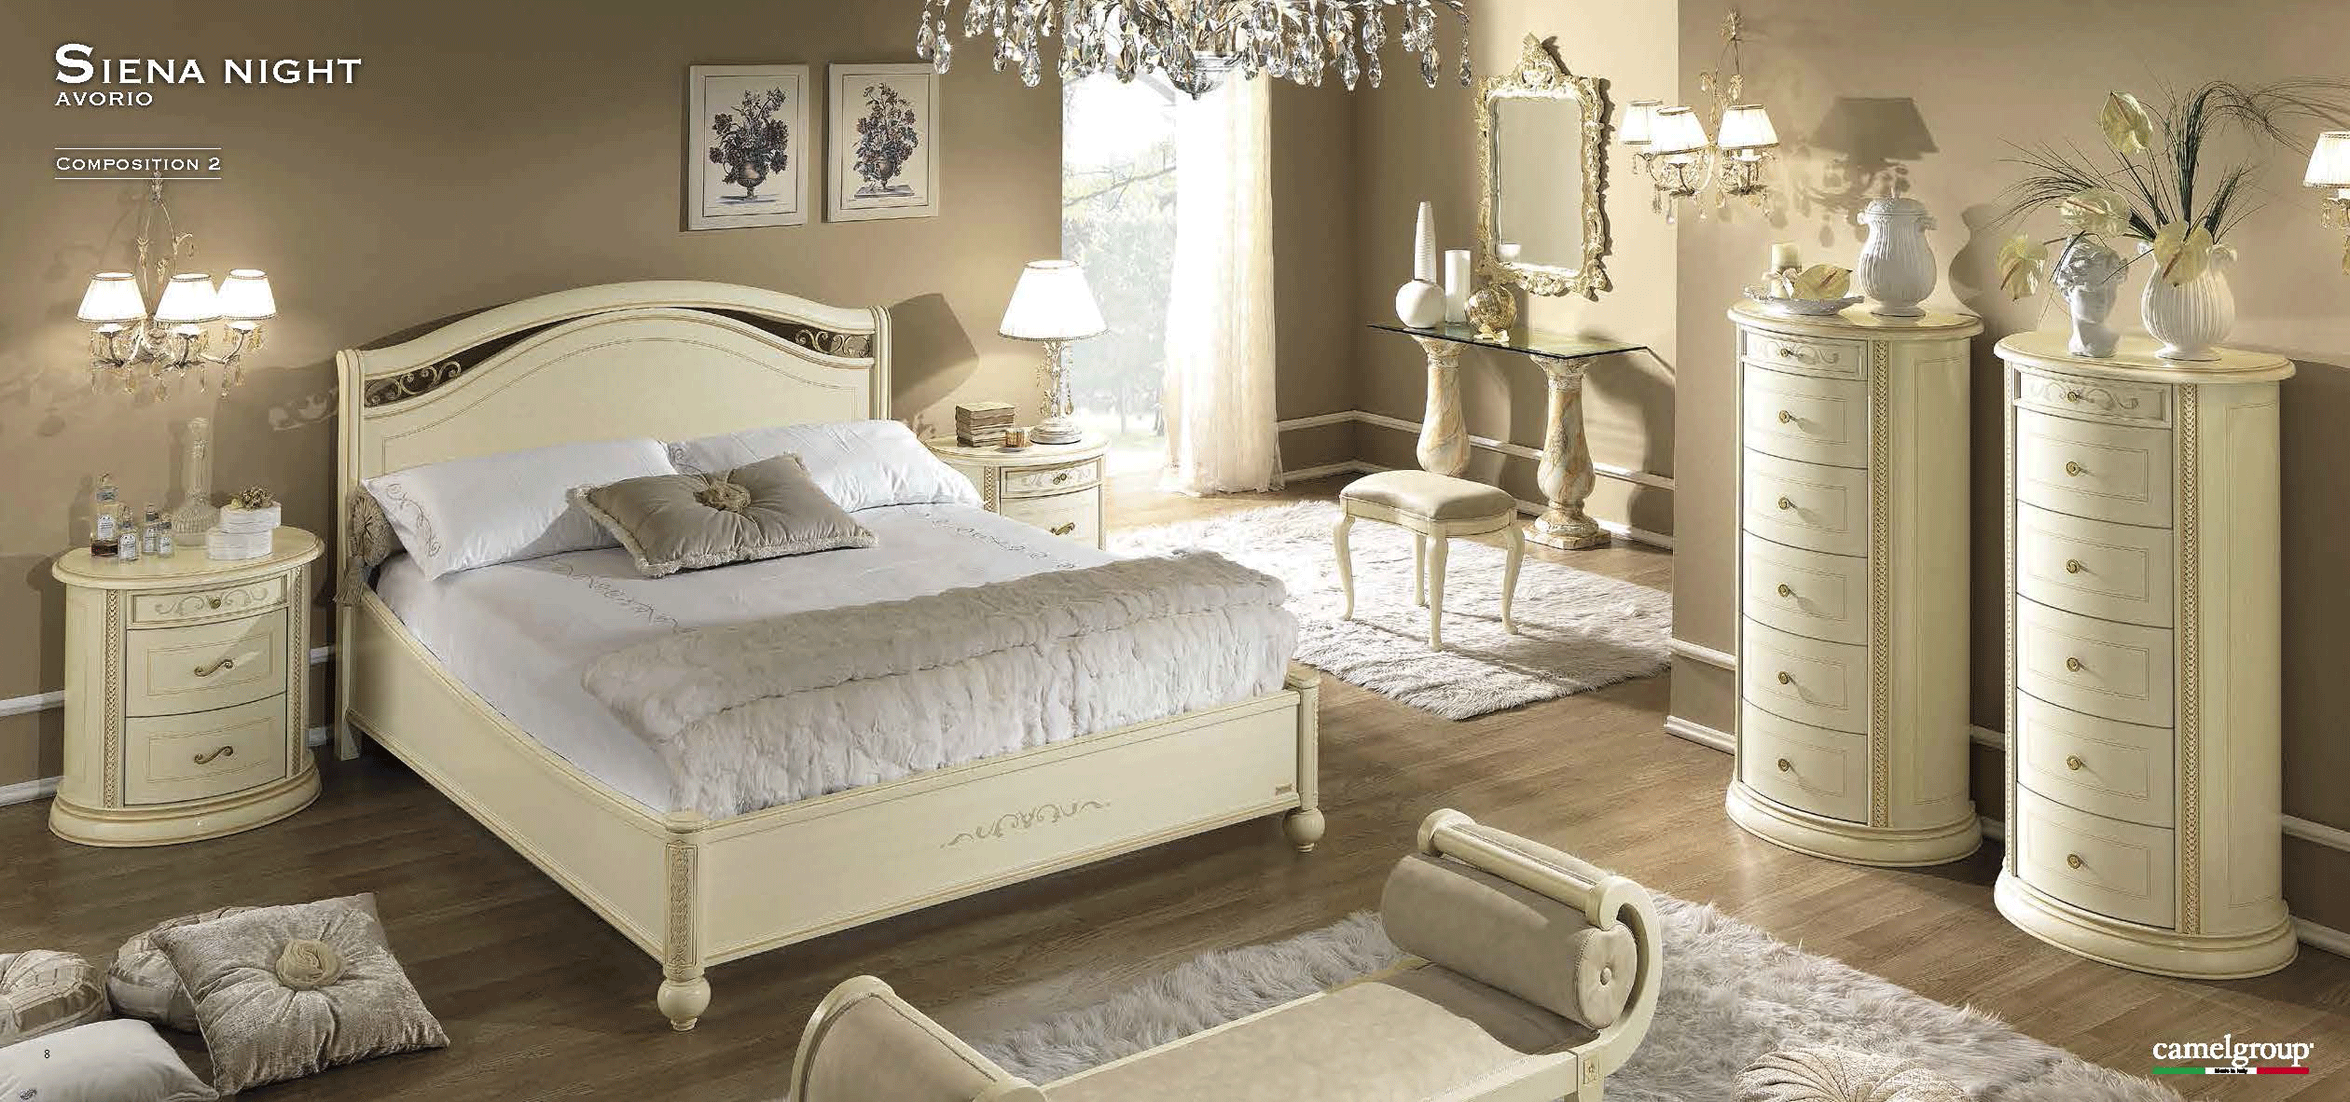 Brands Dupen Mattresses and Frames, Spain Siena Night Ivory